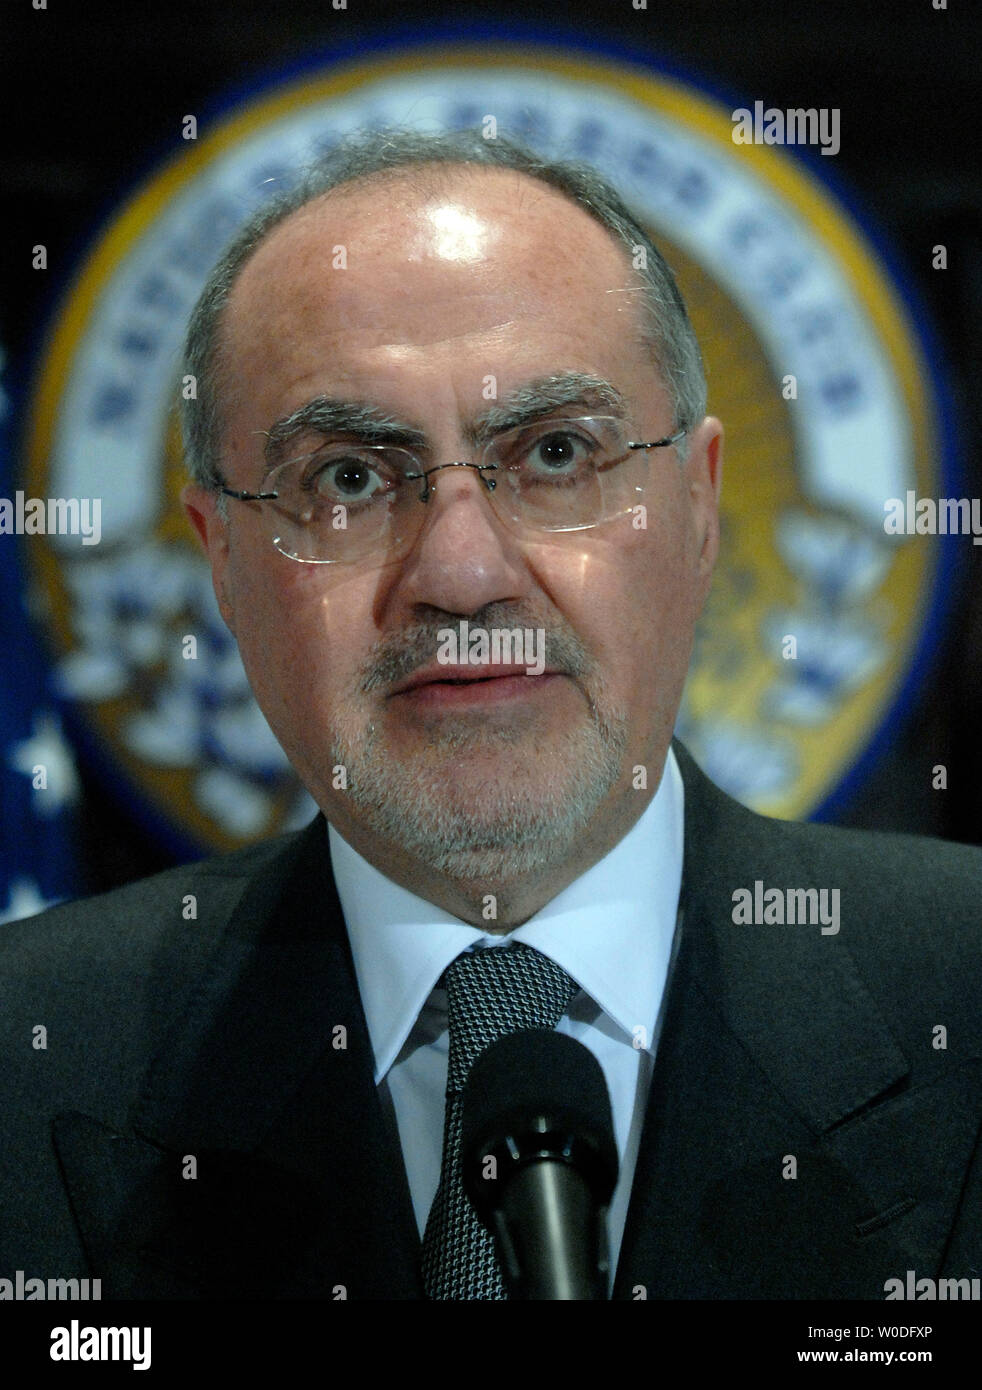 Ali Allawi, senior adviser to Iraqi Prime Minister Nuri Kamal al-Malaki, discusses the effects that the war is having on Iraq during a news conference in Washington on April 9, 2007. (UPI Photo/Kevin Dietsch) Stock Photo